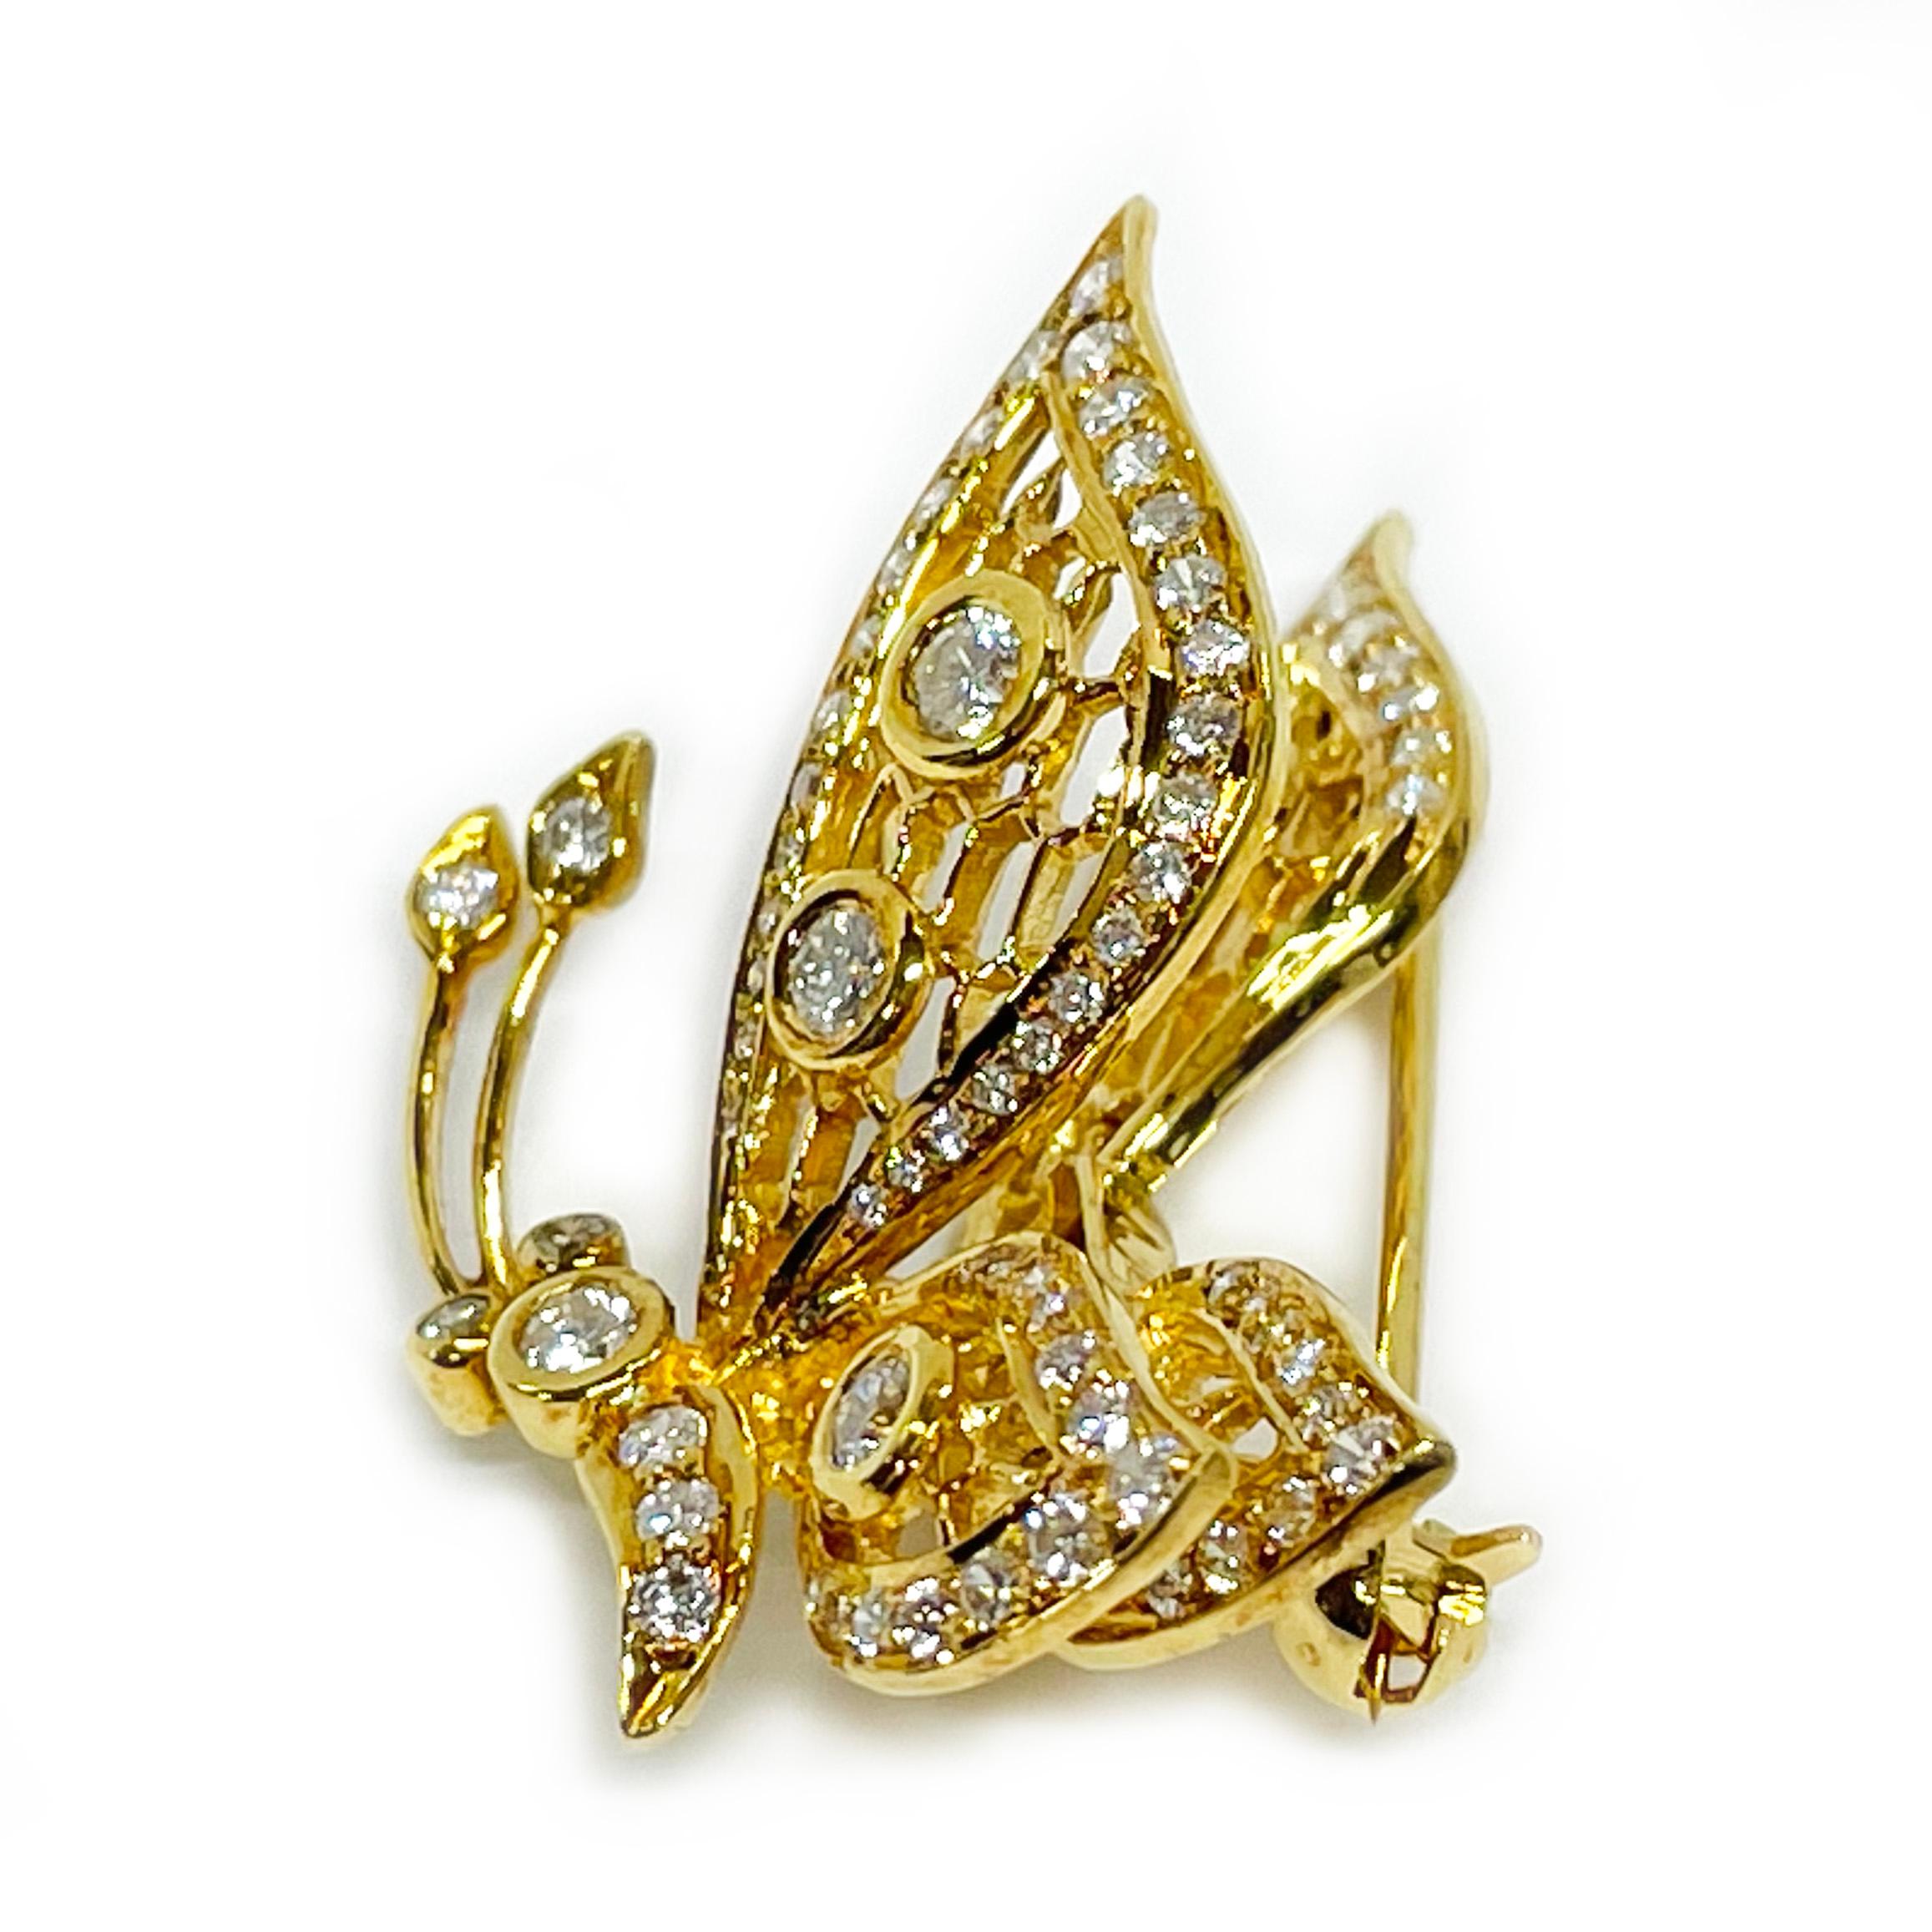 18 Karat Yellow Gold Diamond Spring Movement Butterfly Brooch. This is an absolutely stunning brooch with beautiful detail and both bezel and bead-set brilliant-cut diamonds. The diamonds adorn the wings, body, and antennae of the butterfly. In